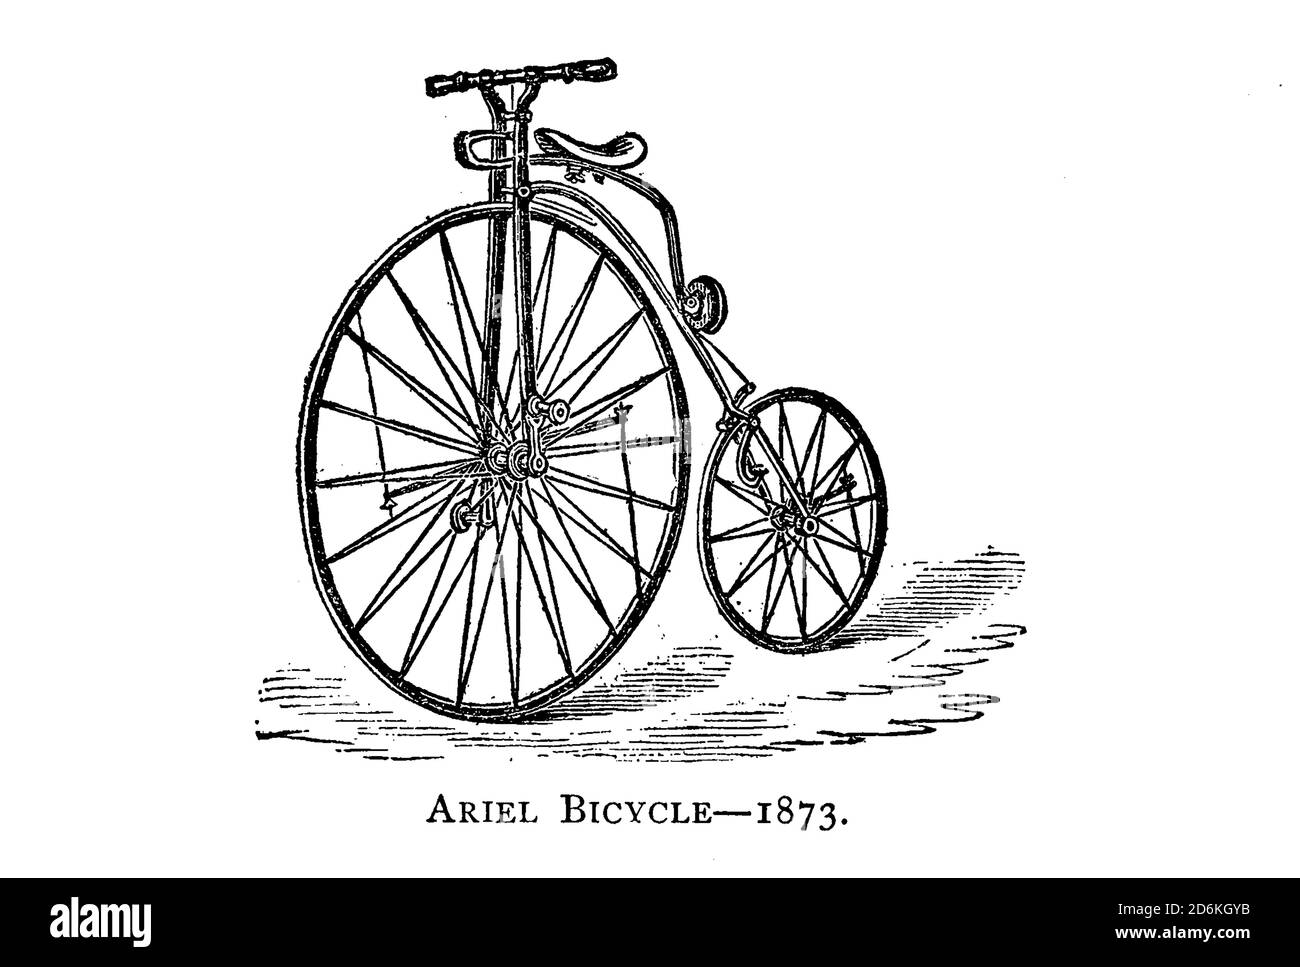 Ariel high wheel bicycle 1873 [British Made] From Wheels and Wheeling; An indispensable handbook for cyclists, with over two hundred illustrations by Porter, Luther Henry. Published in Boston in  1892 Stock Photo